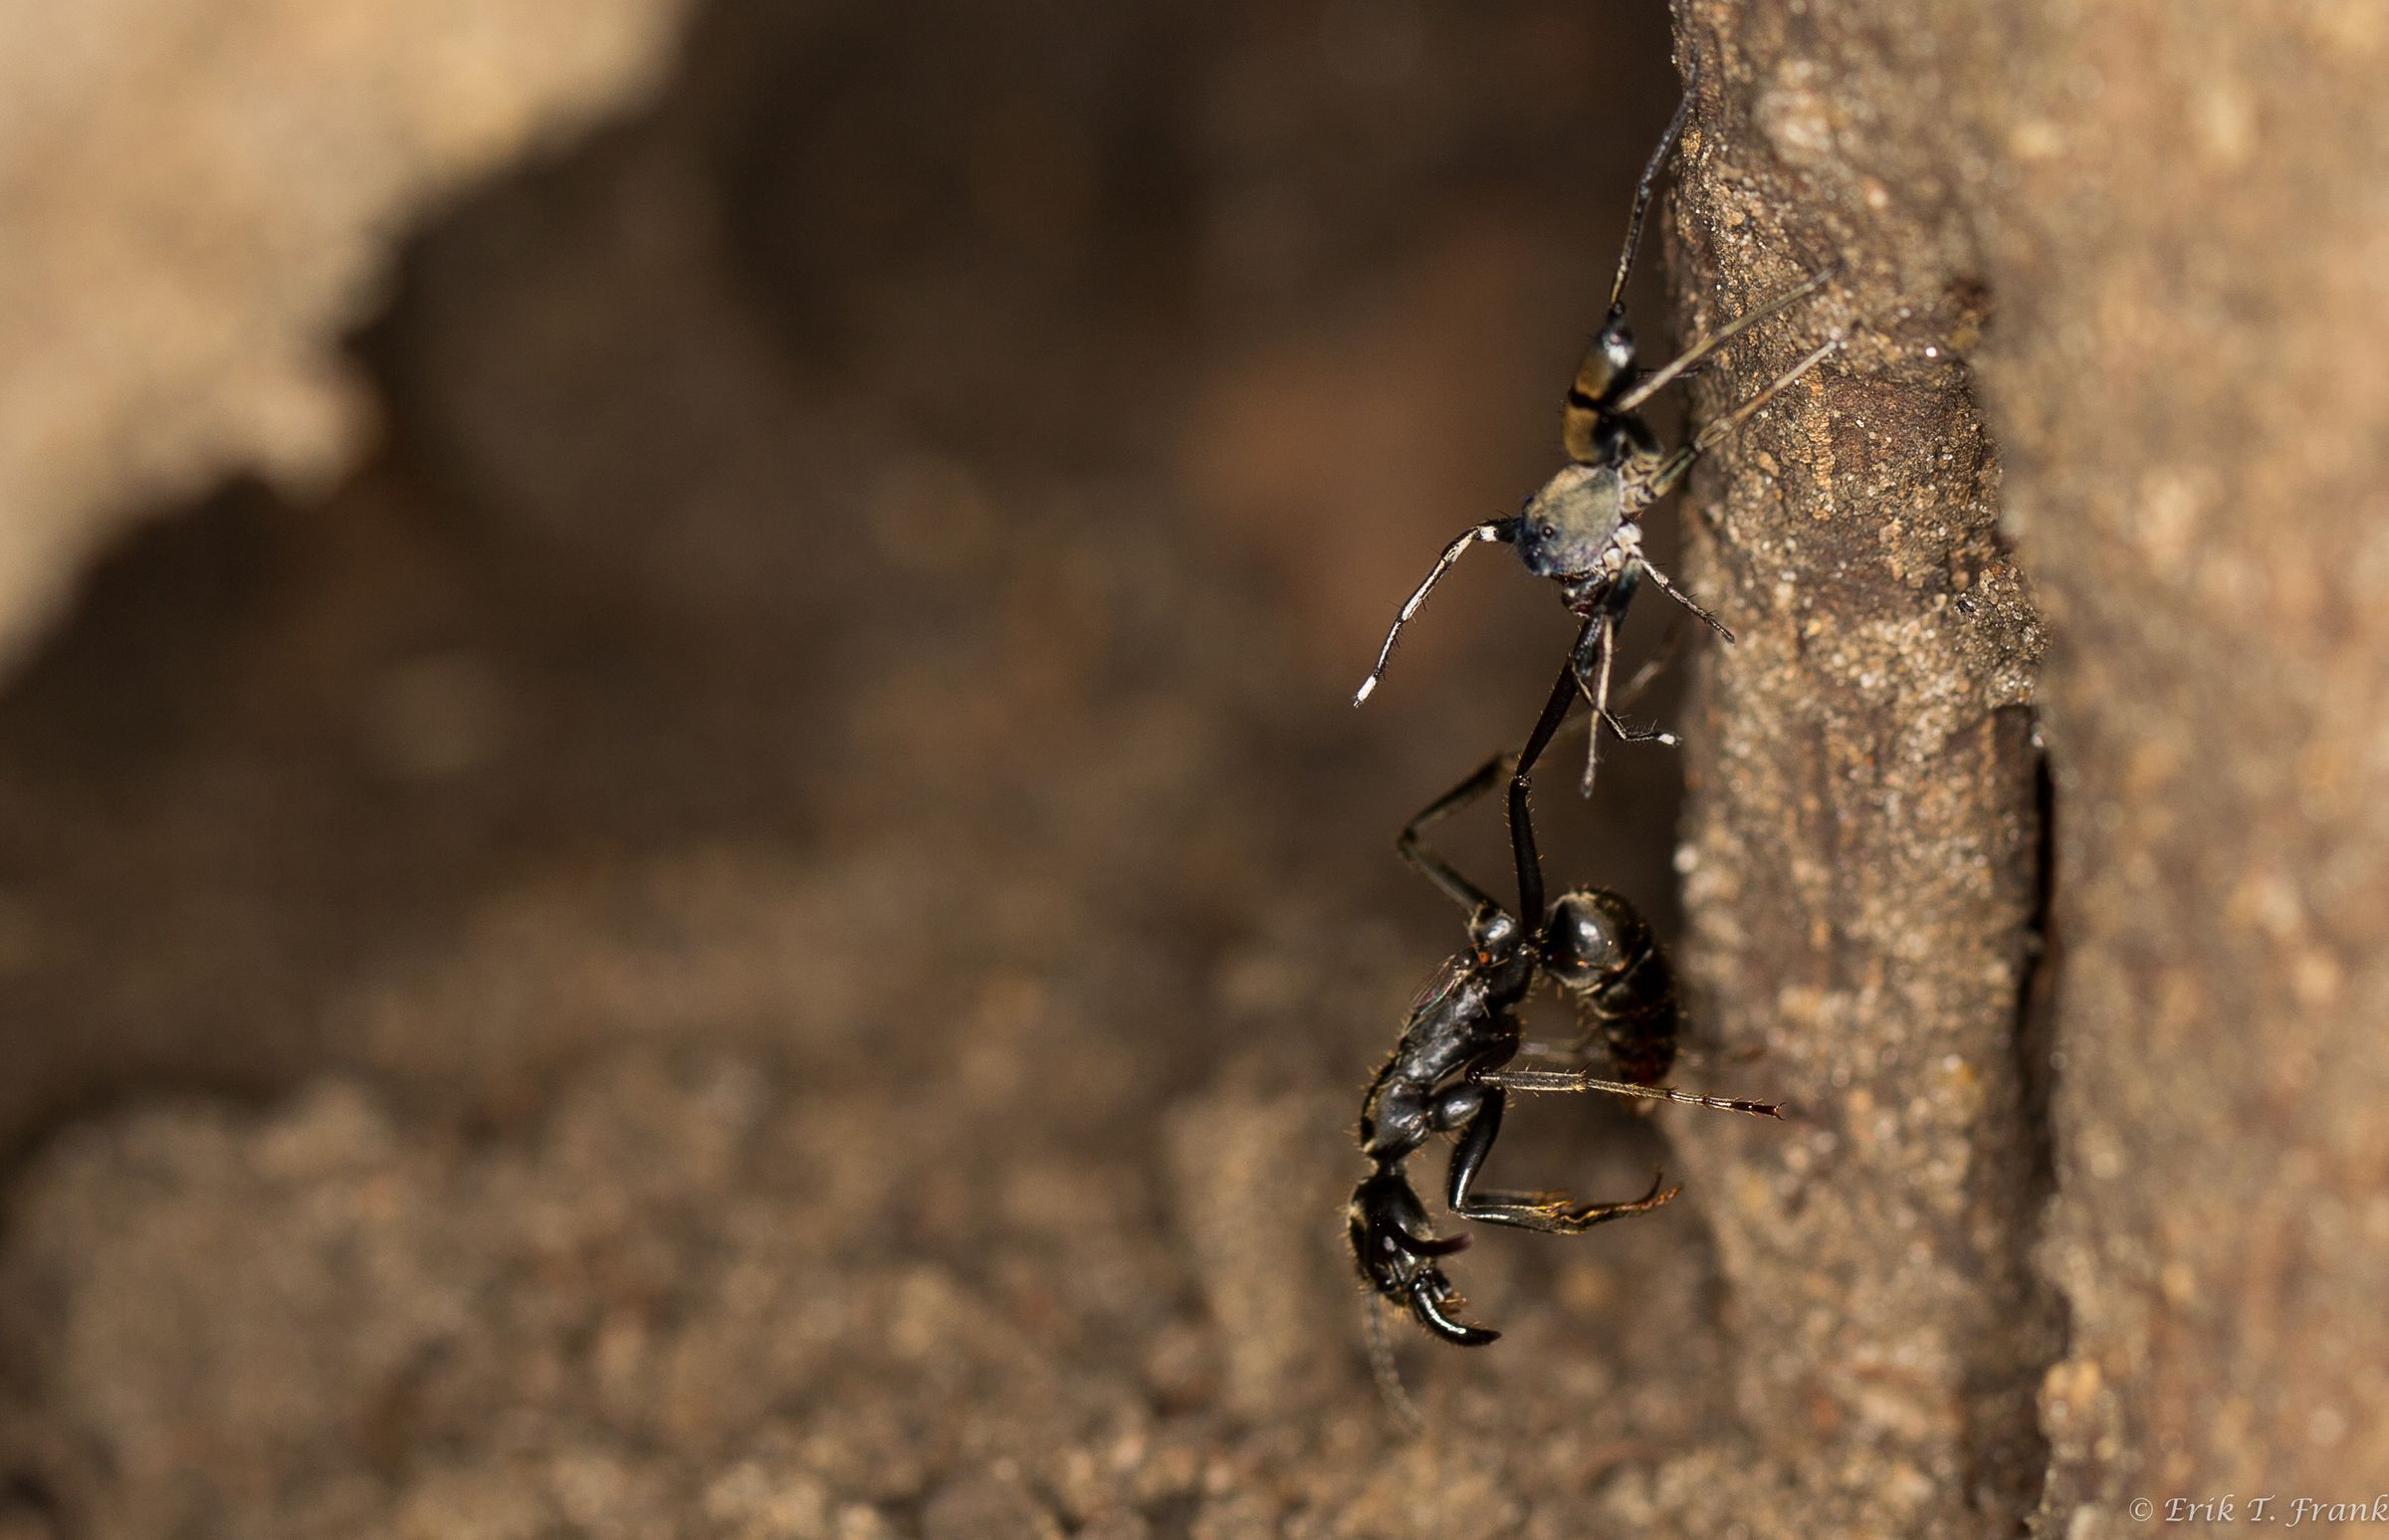 An injured M. analis ant is ambushed by a jumping spider while returning from the hunting ground alone.